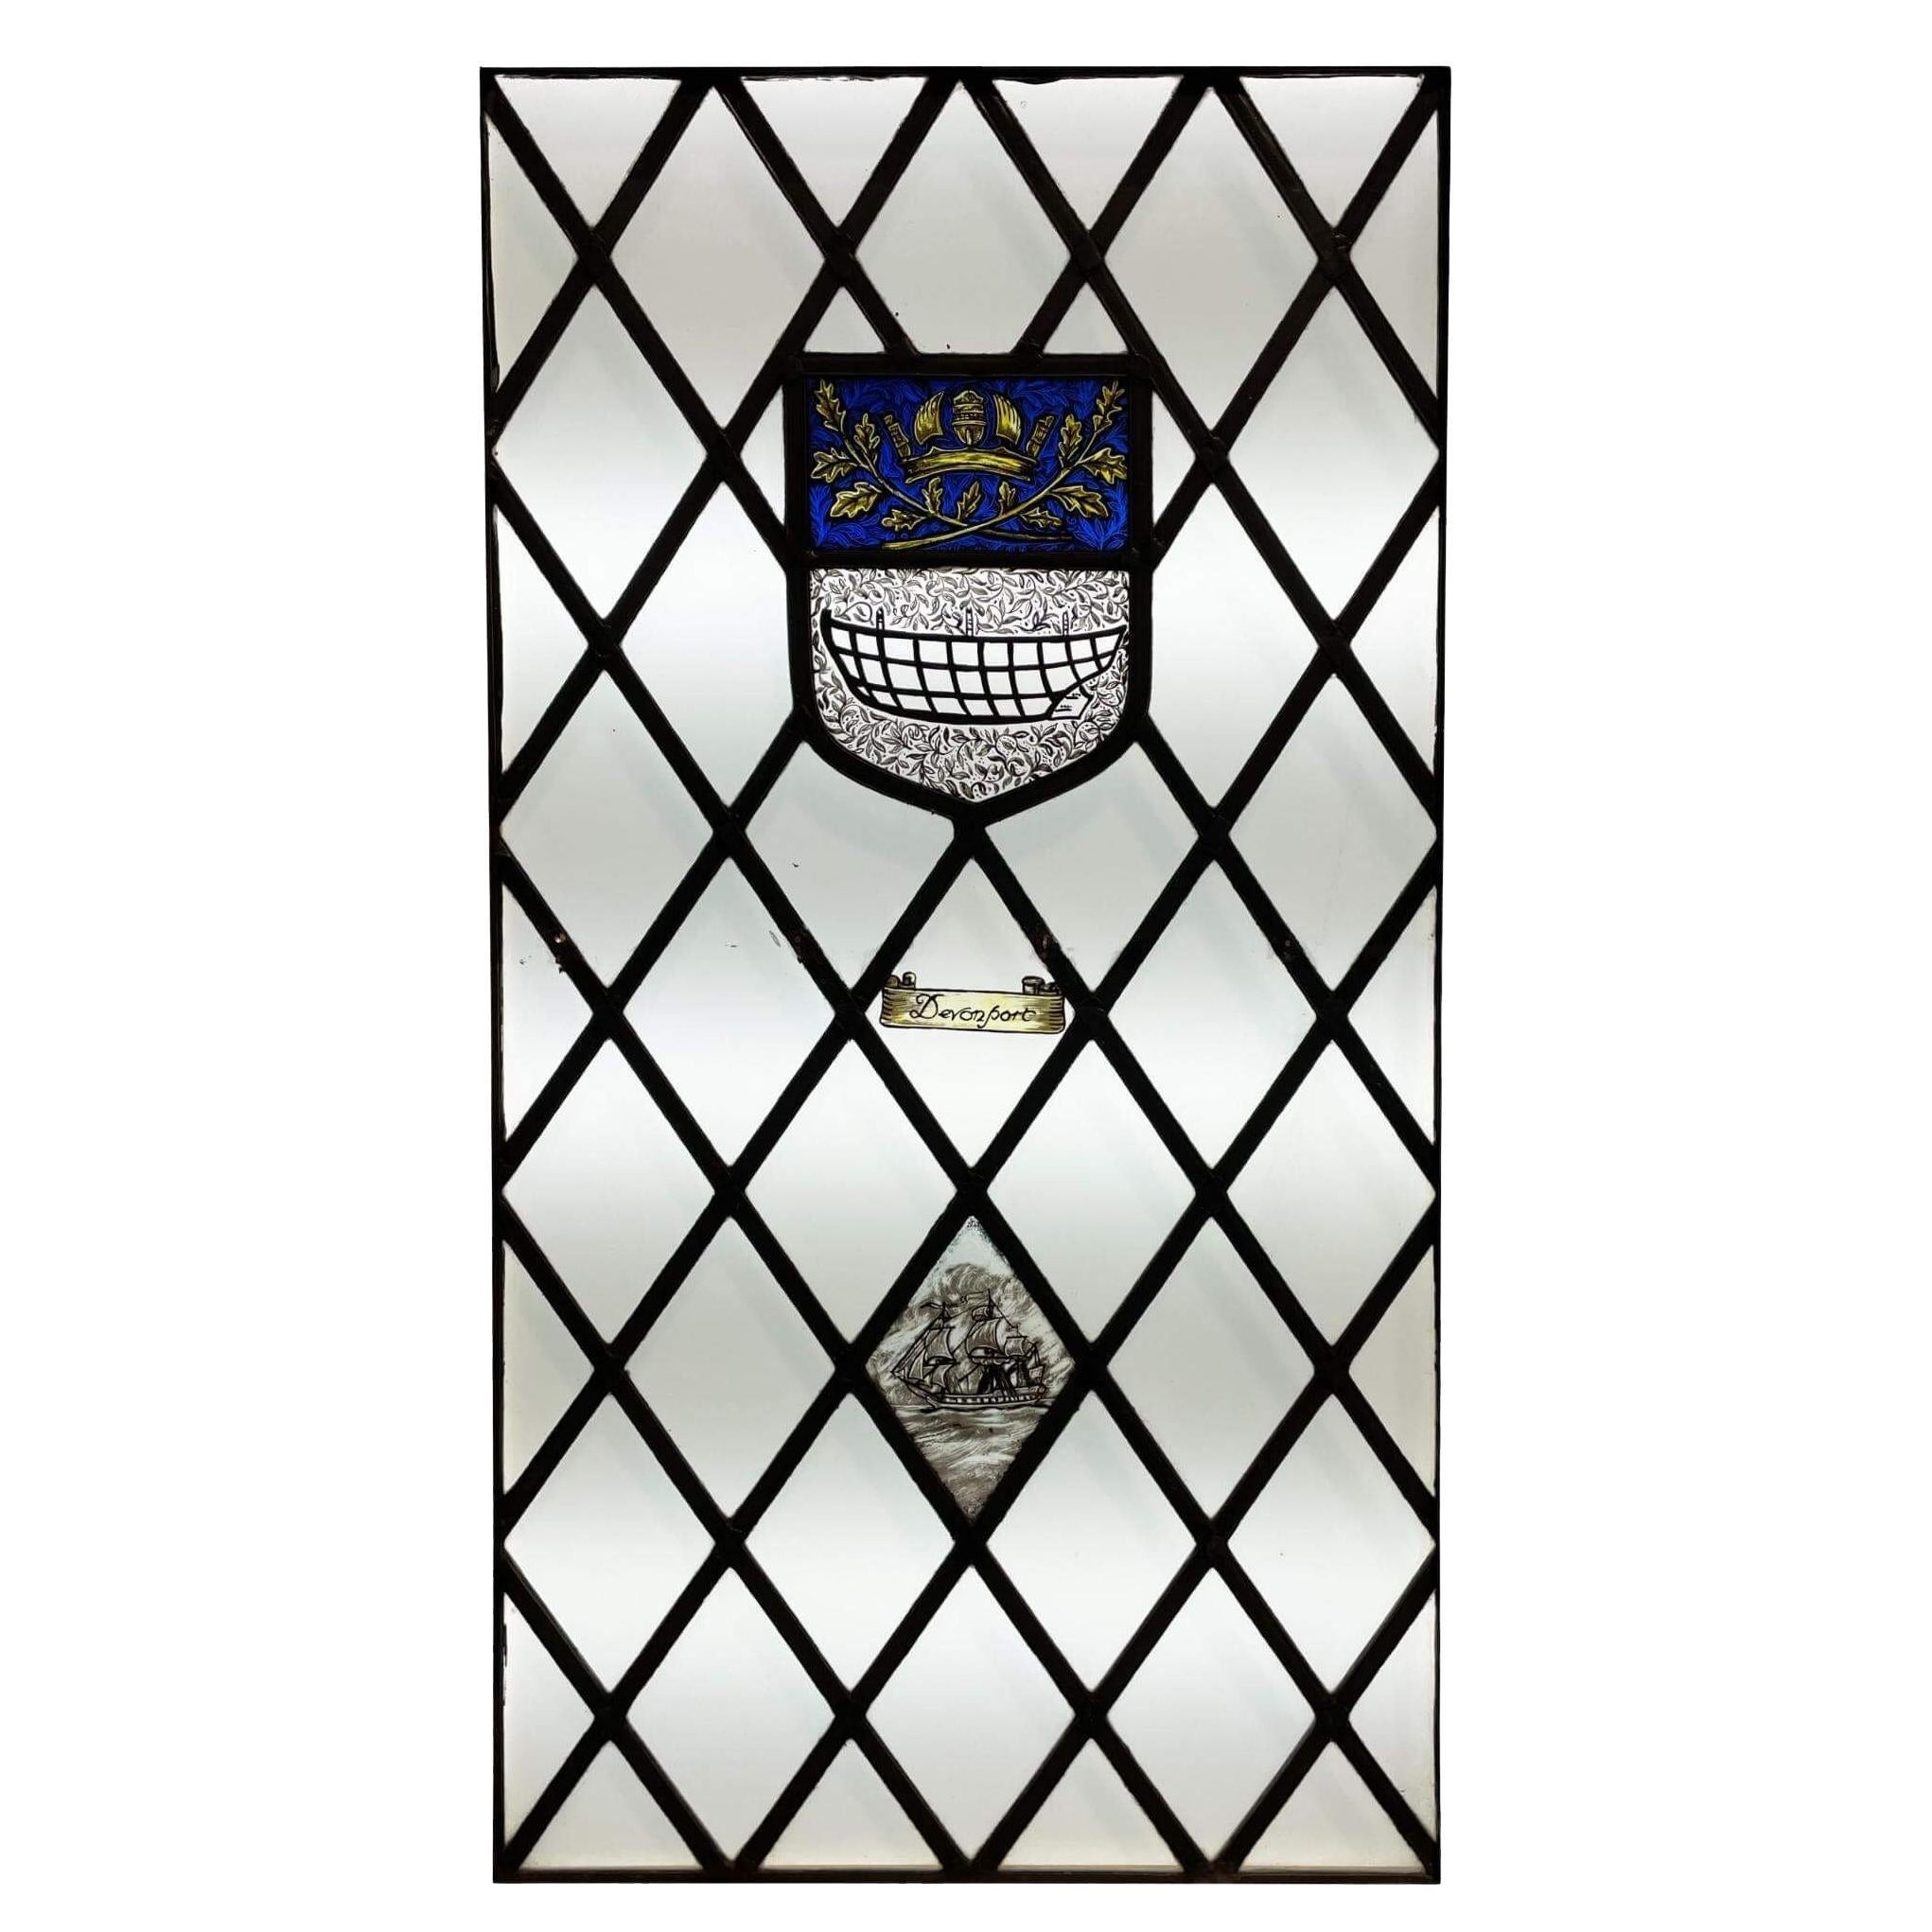 ‘Devonport’ Antique Stained Glass Window For Sale